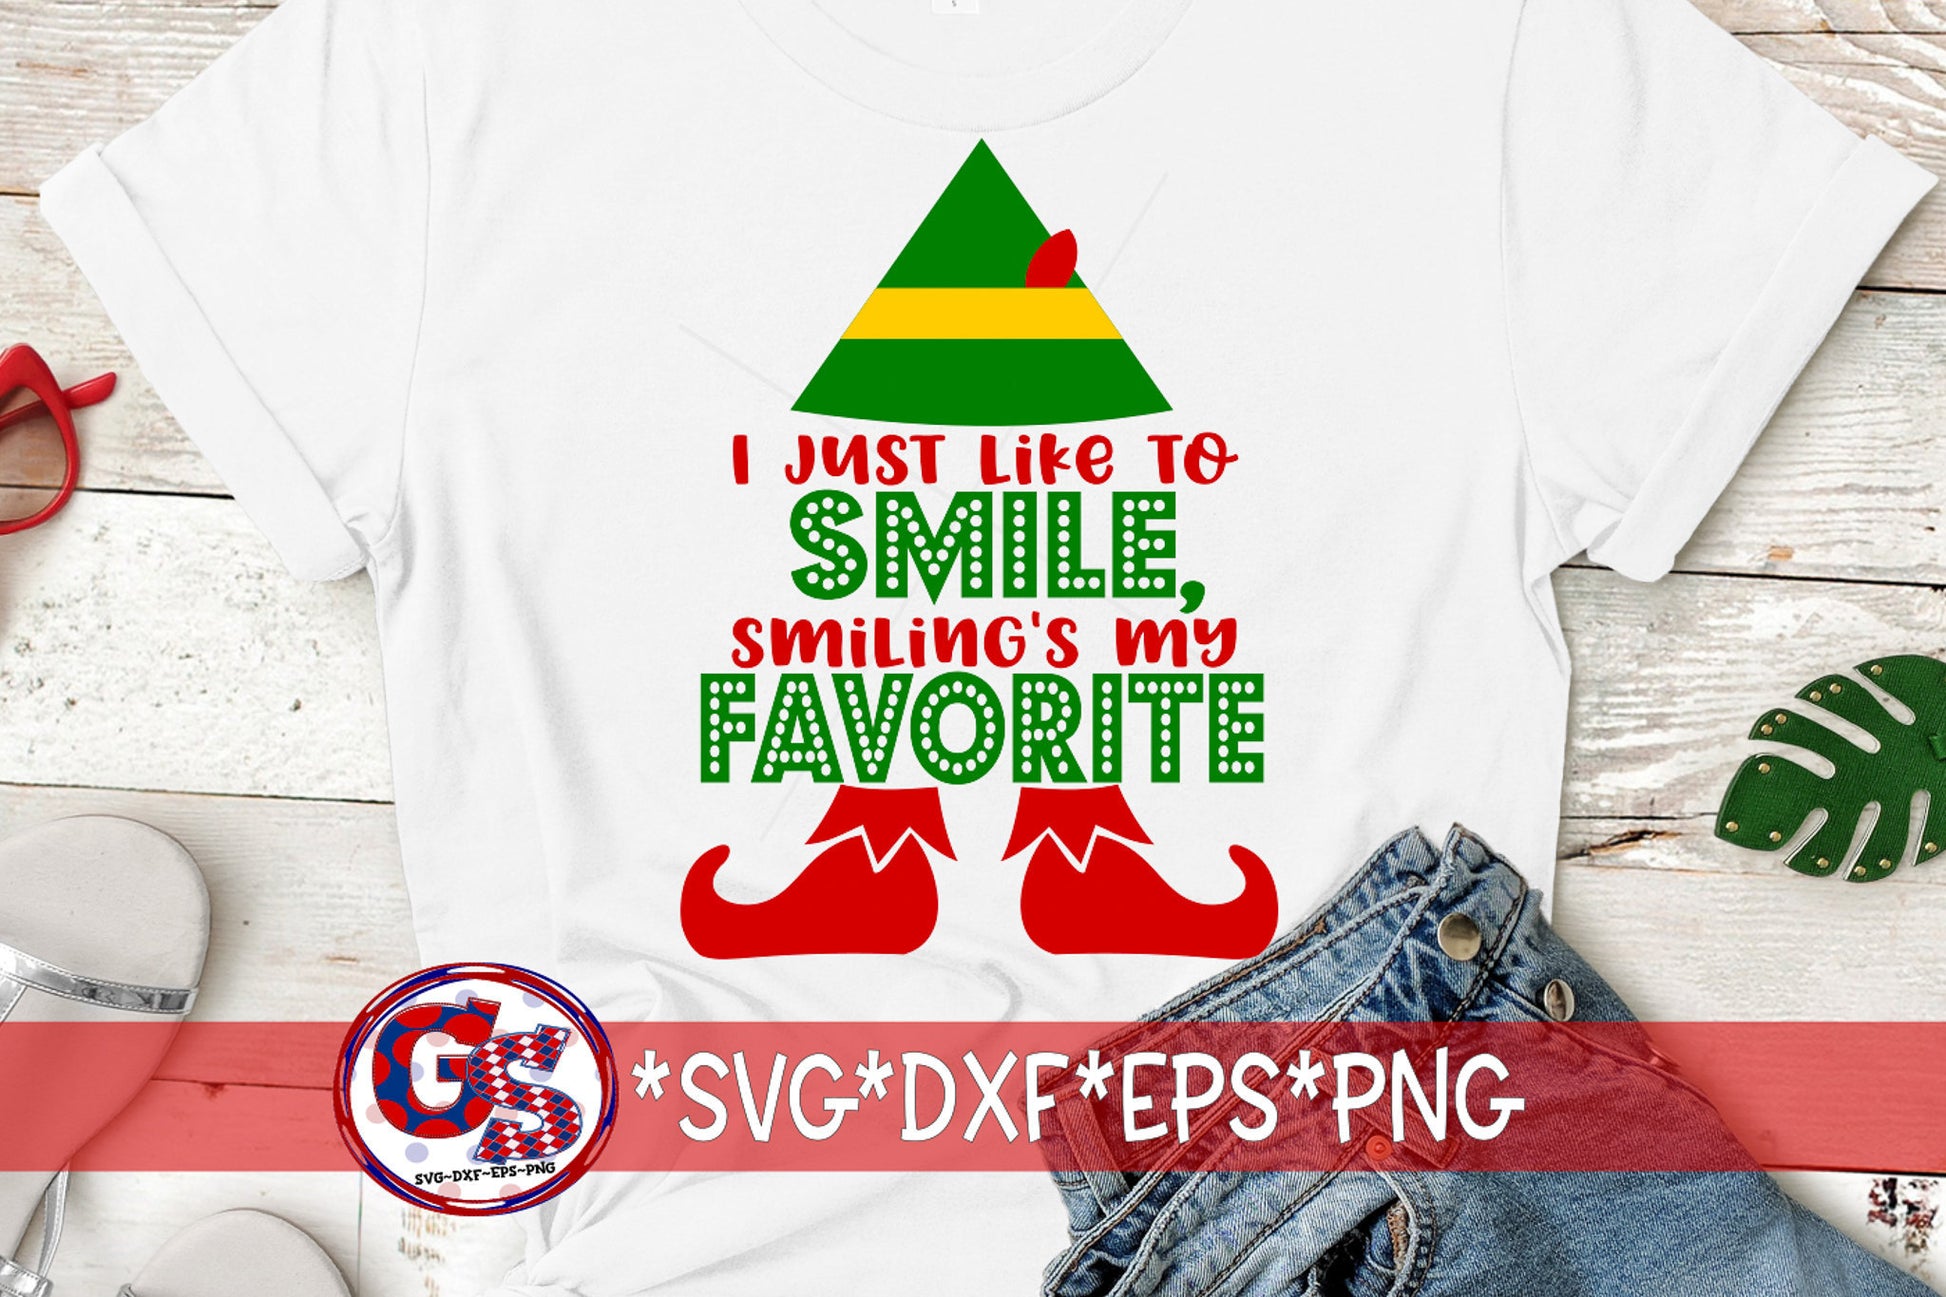 Christmas SvG | I Just Like To Smile, Smiling&#39;s My Favorite svg, dxf, eps, png. Elf SvG | Elf DxF | Christmas | Instant Download Cut Files.